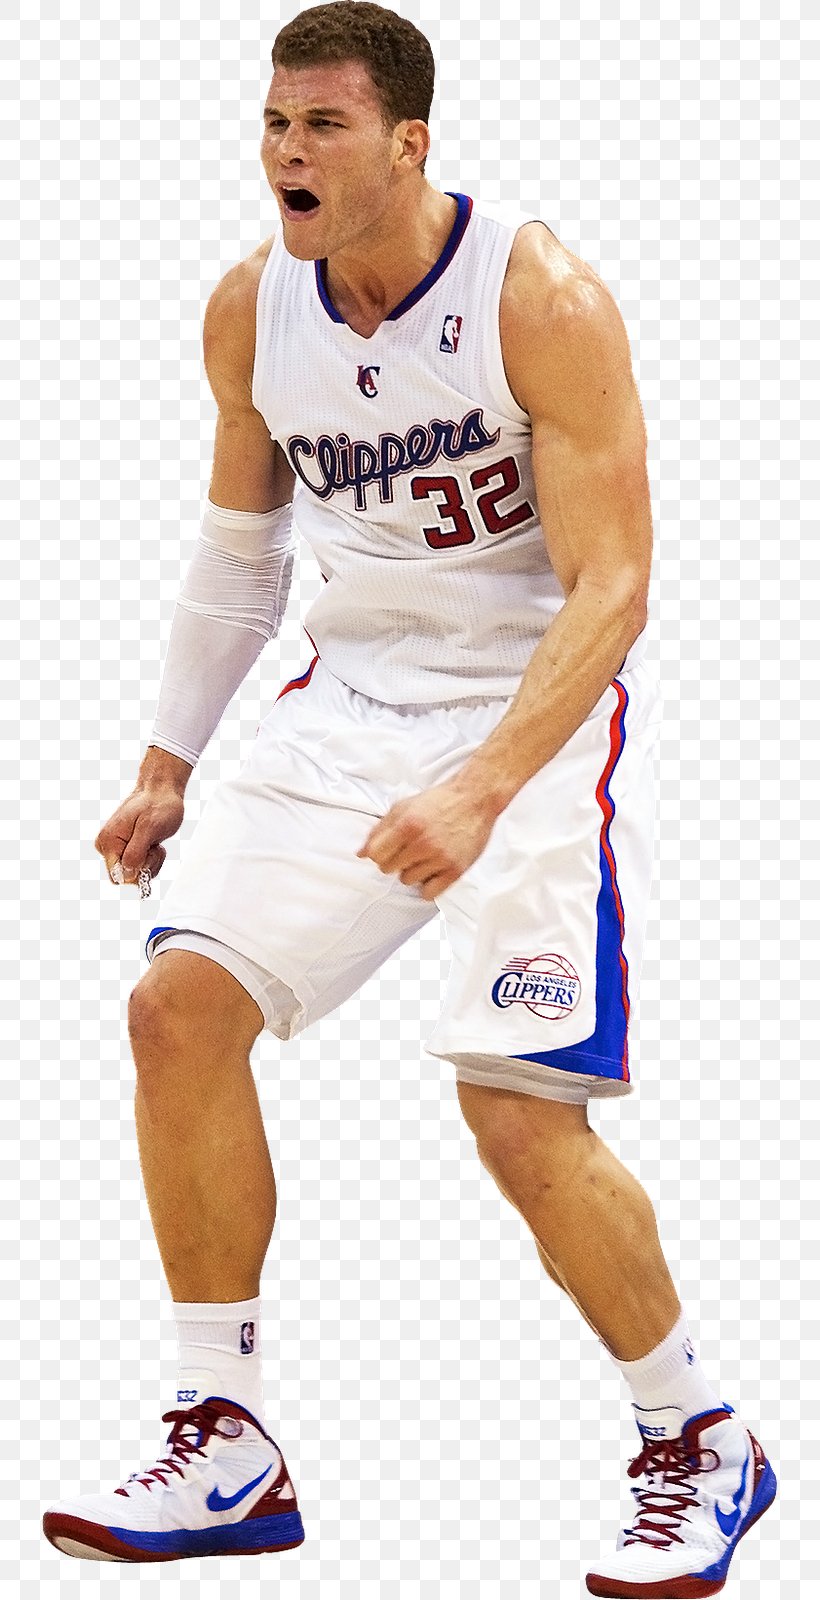 Blake Griffin Los Angeles Clippers Basketball Player Athlete, PNG, 735x1600px, Blake Griffin, Arm, Athlete, Basketball, Basketball Player Download Free